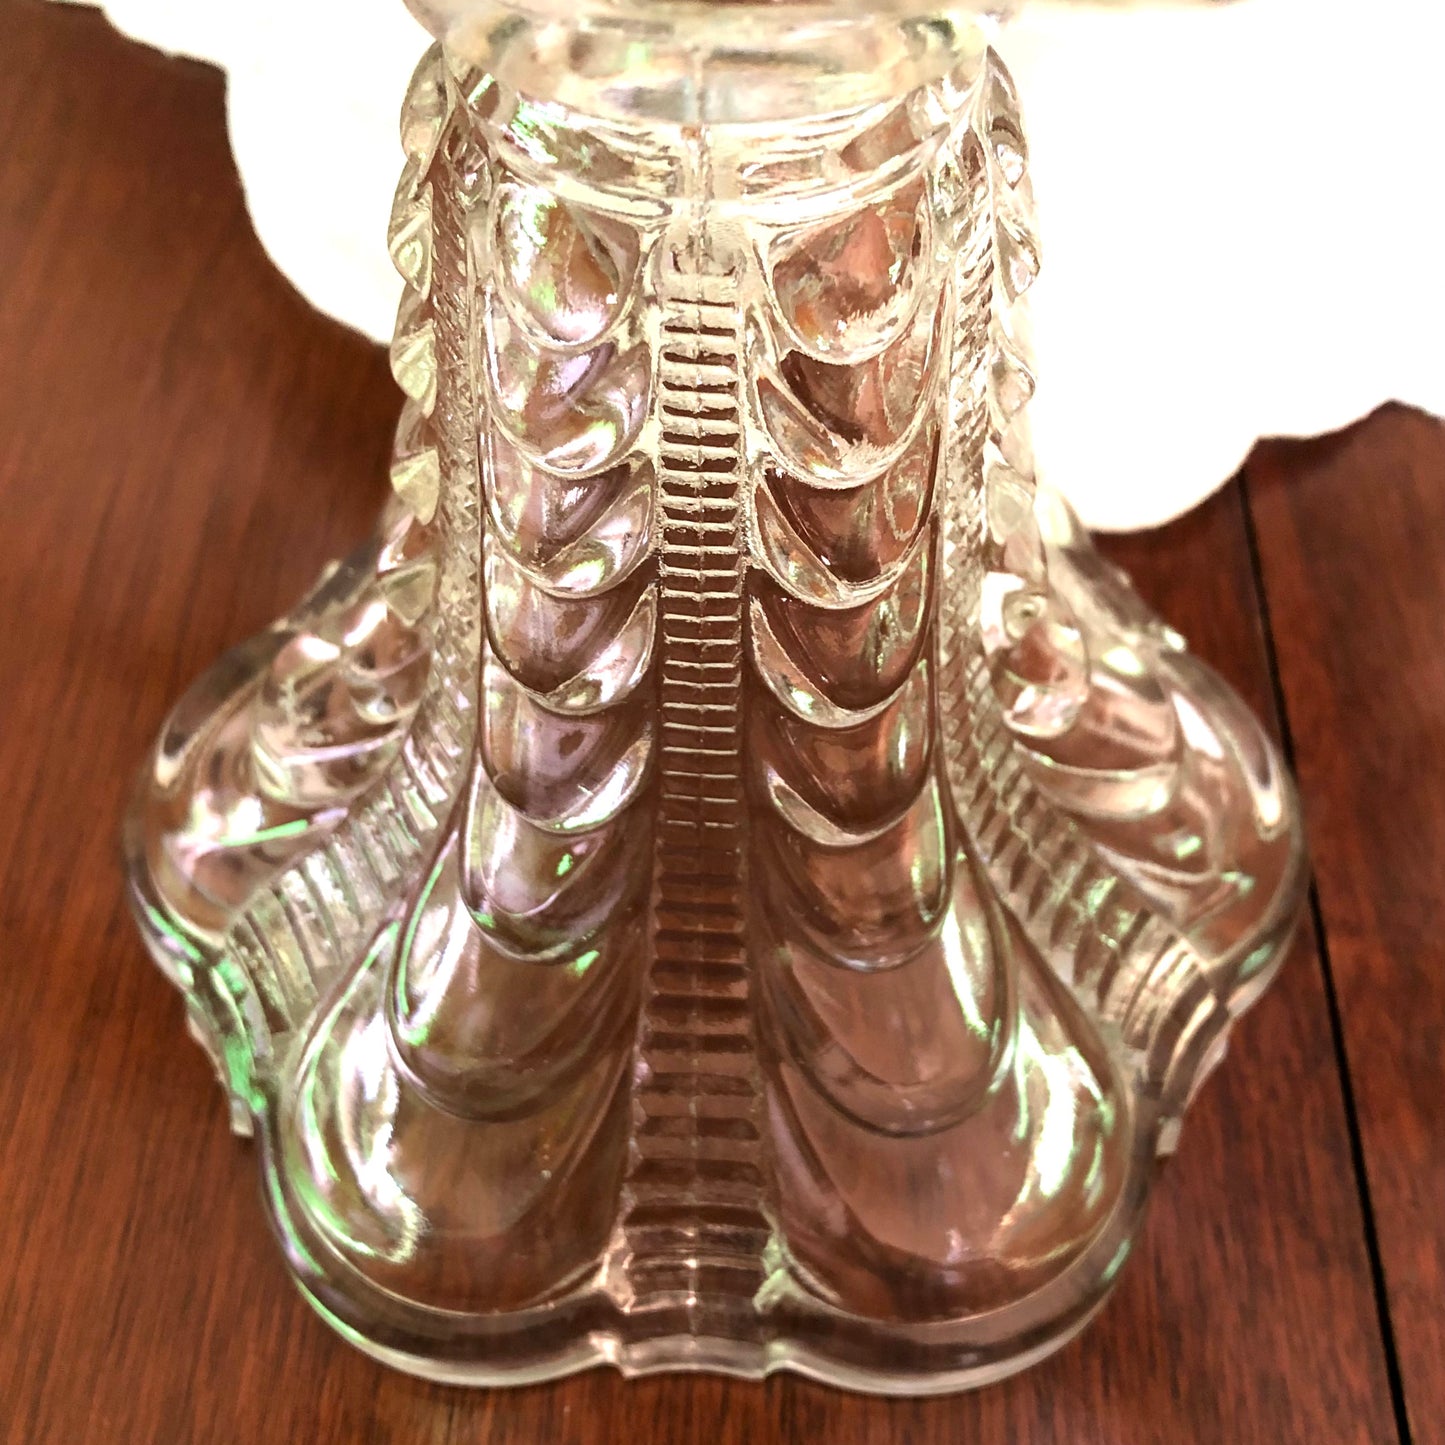 Early Pressed Glass Oil Lamp, 16-1/2"